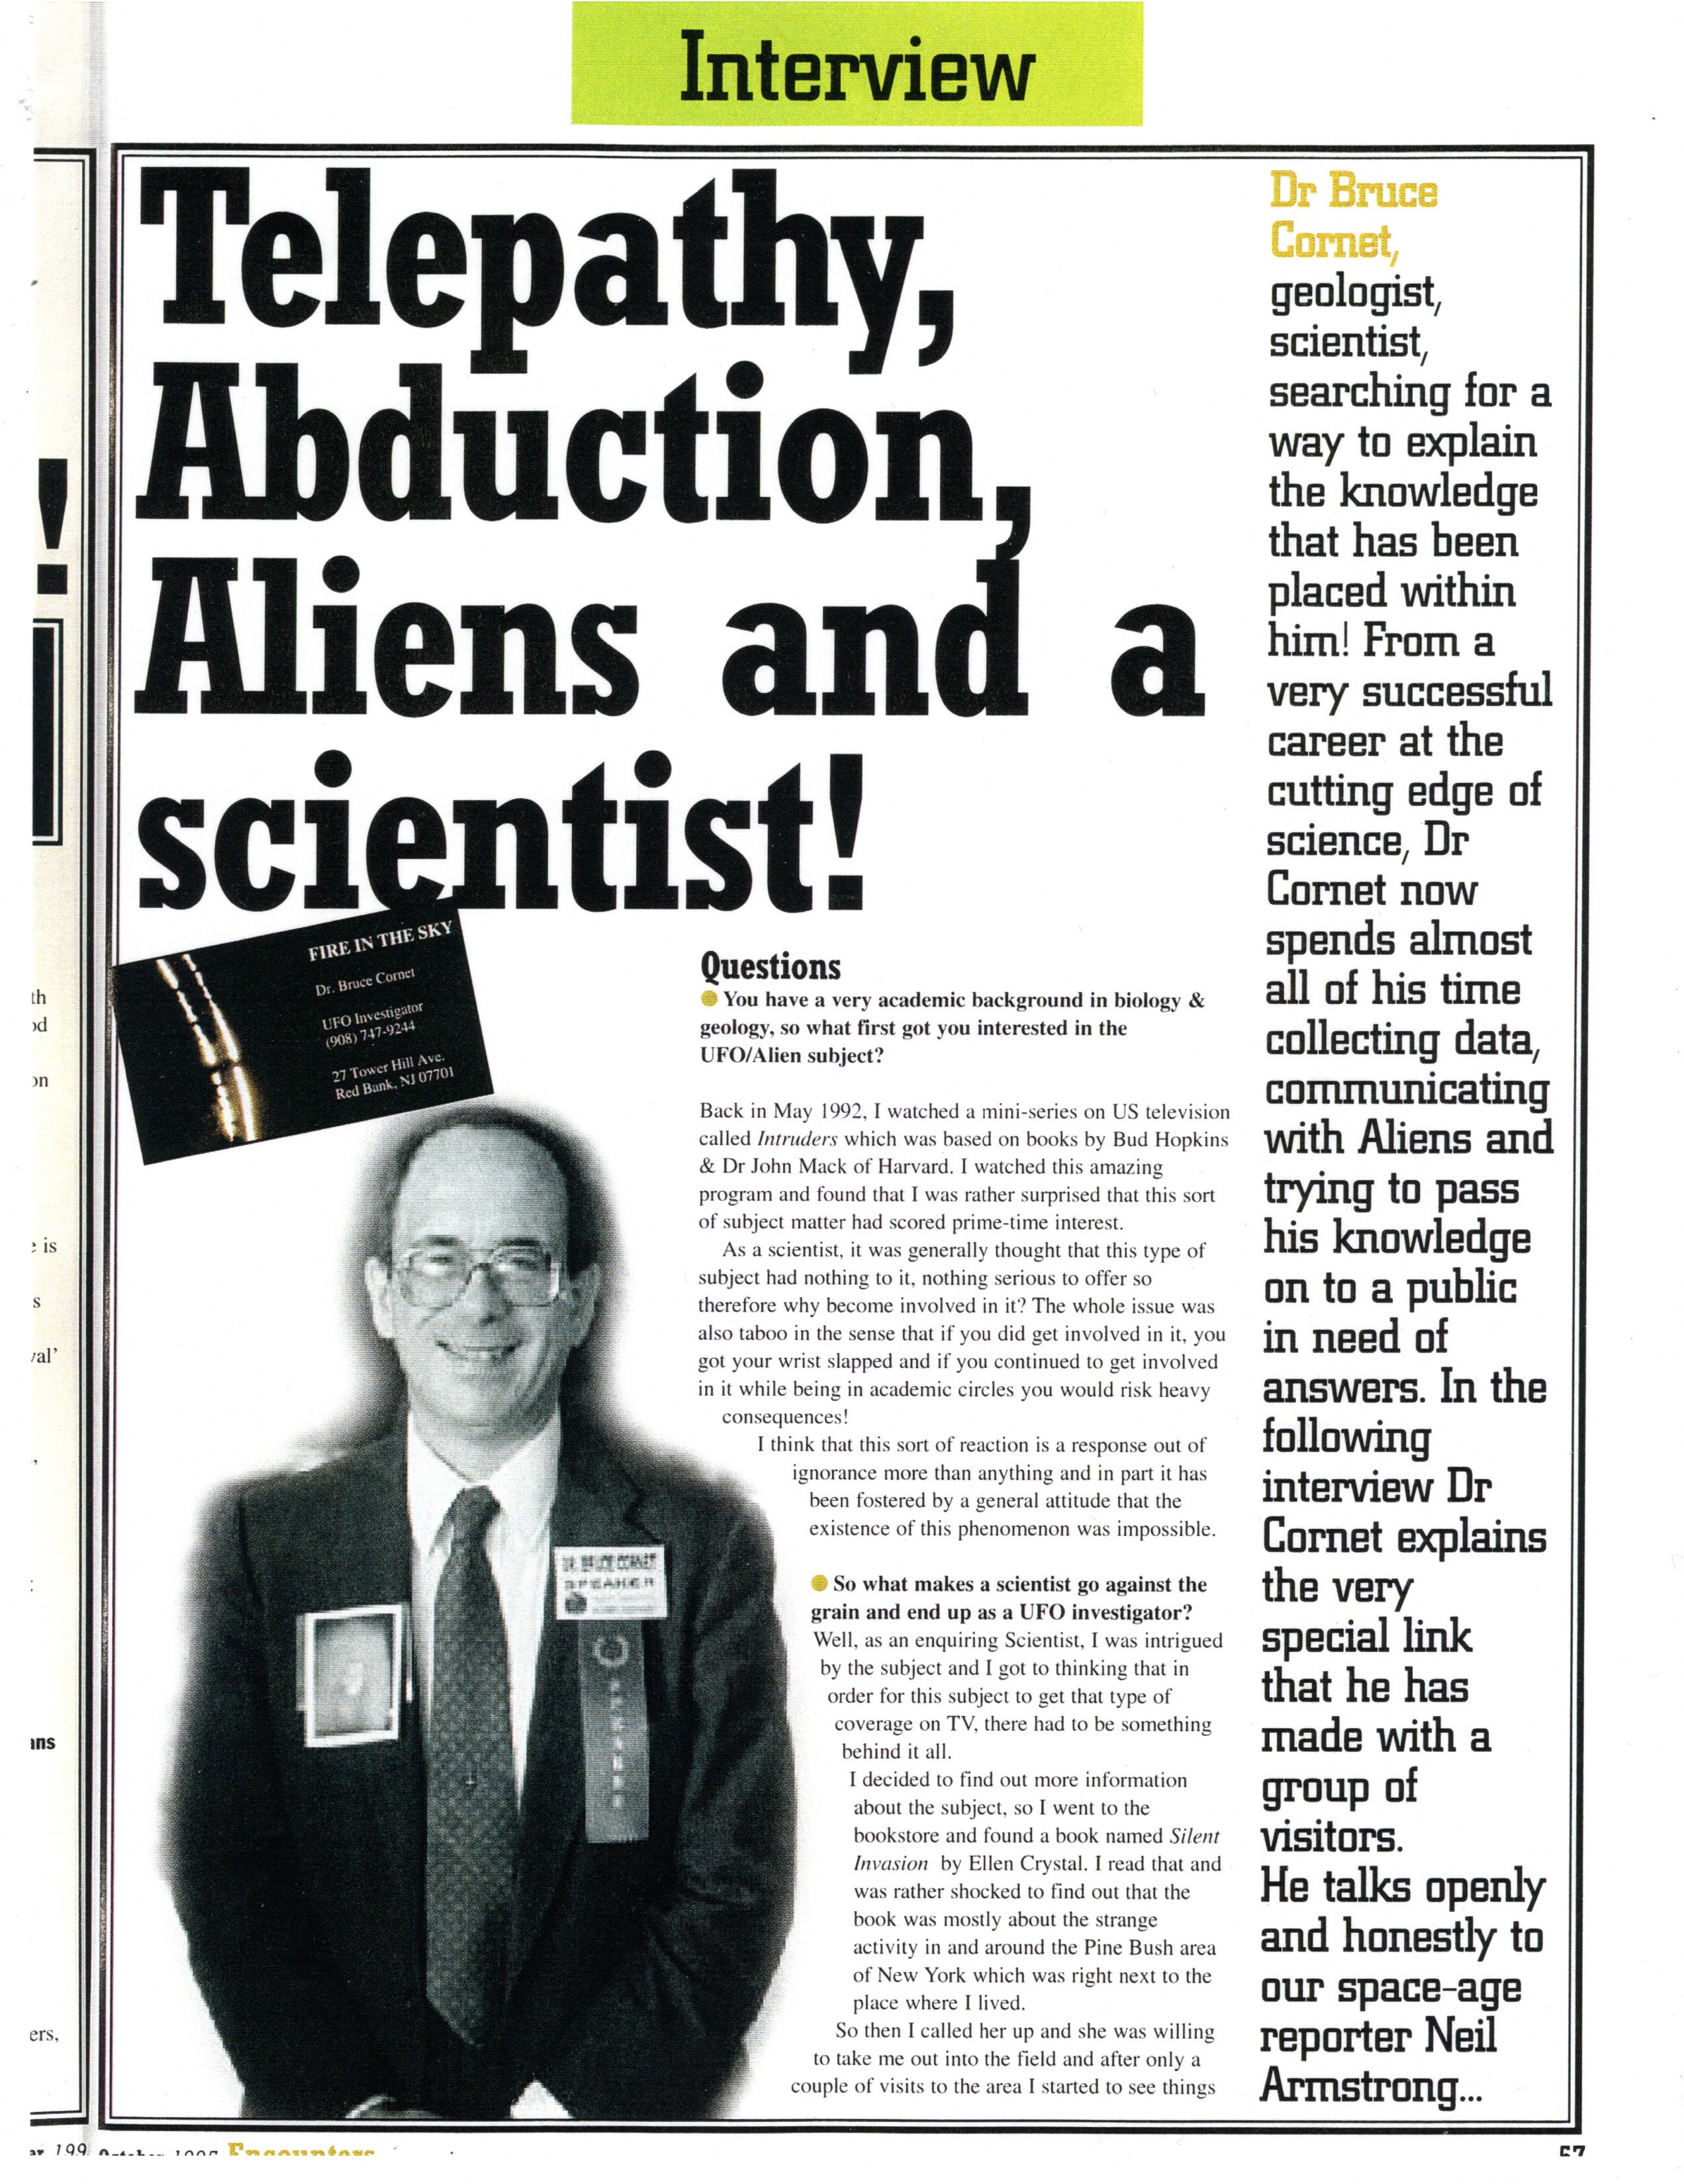 Encounters Issue 1 October 1995 2